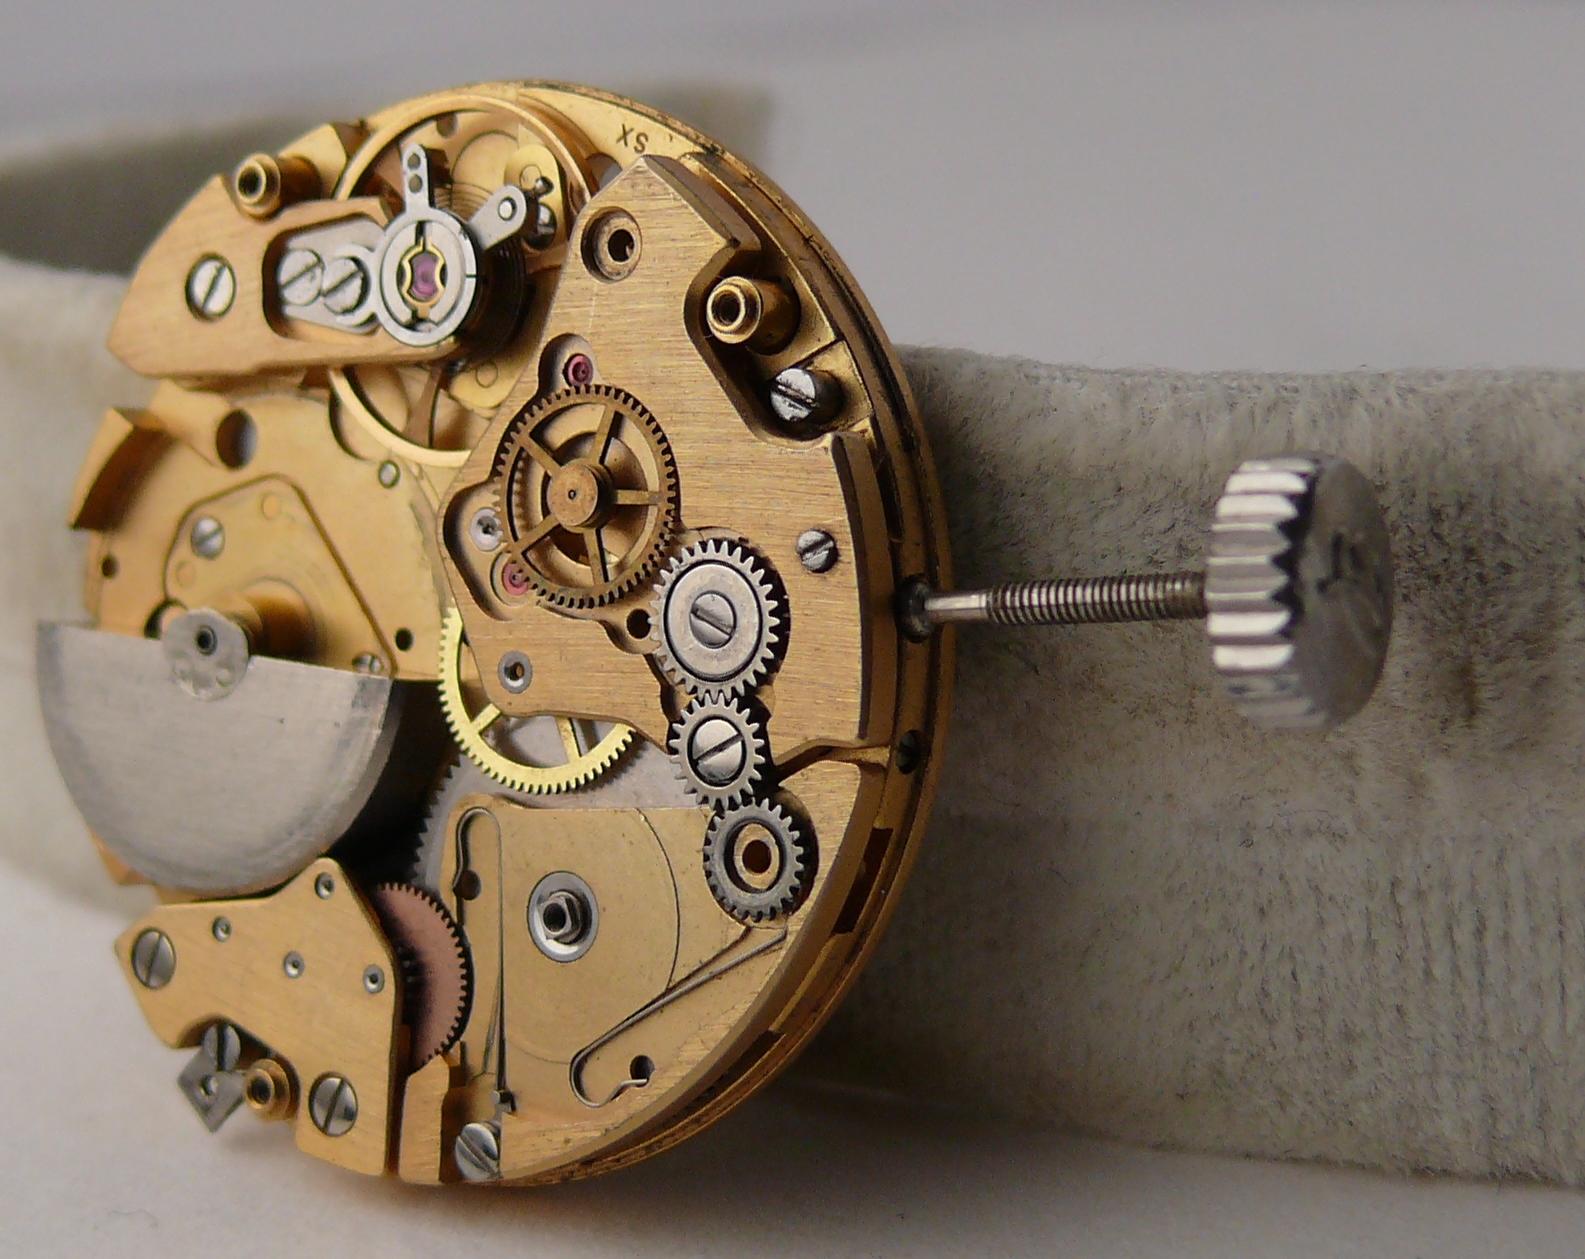 Incomplete Vintage Breitling calibre 12 Movement for Parts projects or restorations